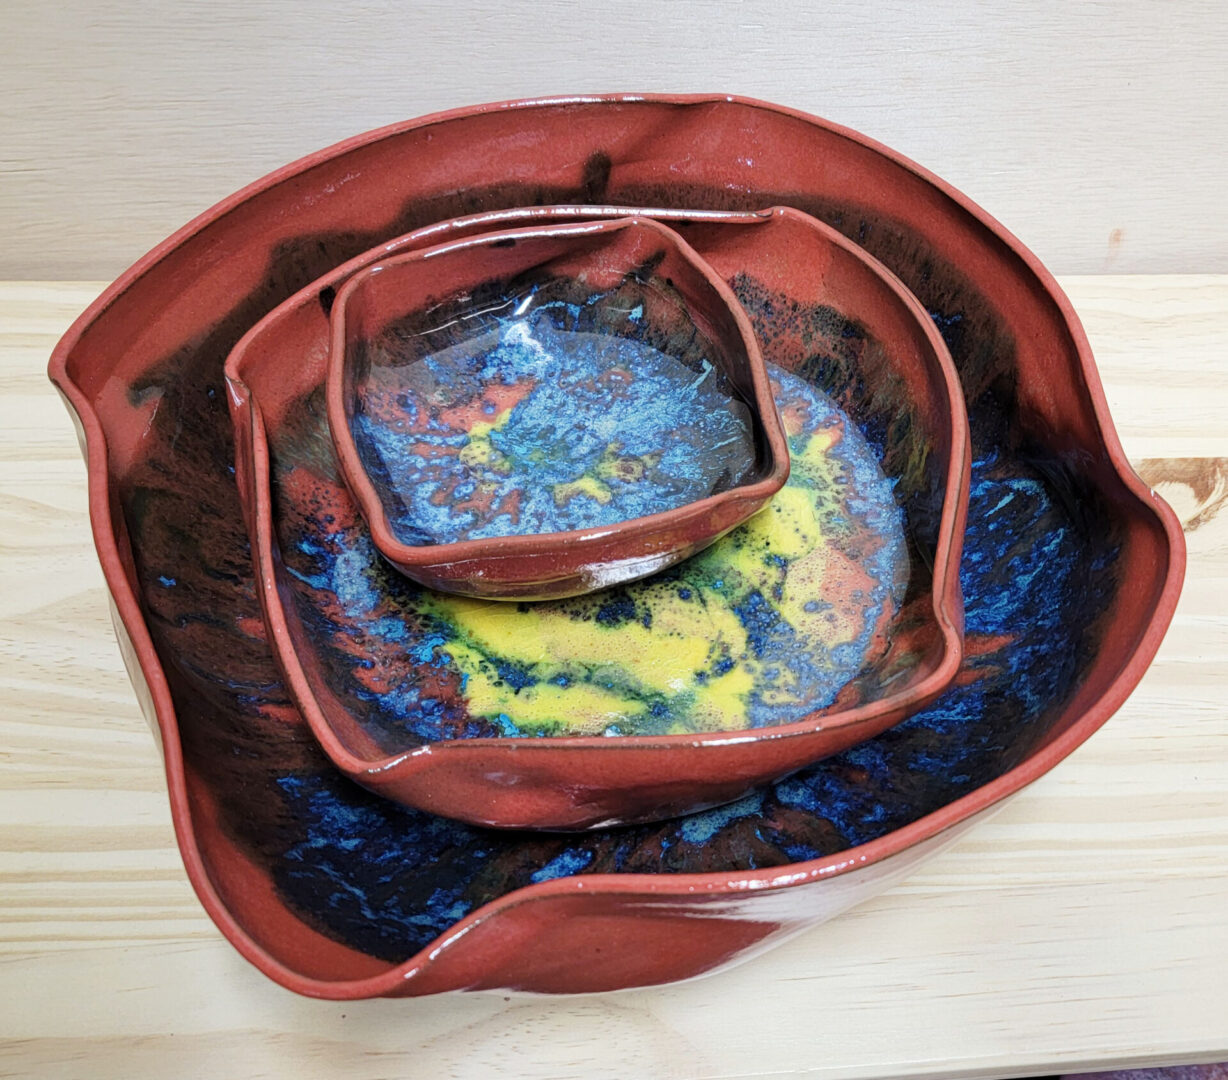 A set of three bowls with different designs on them.